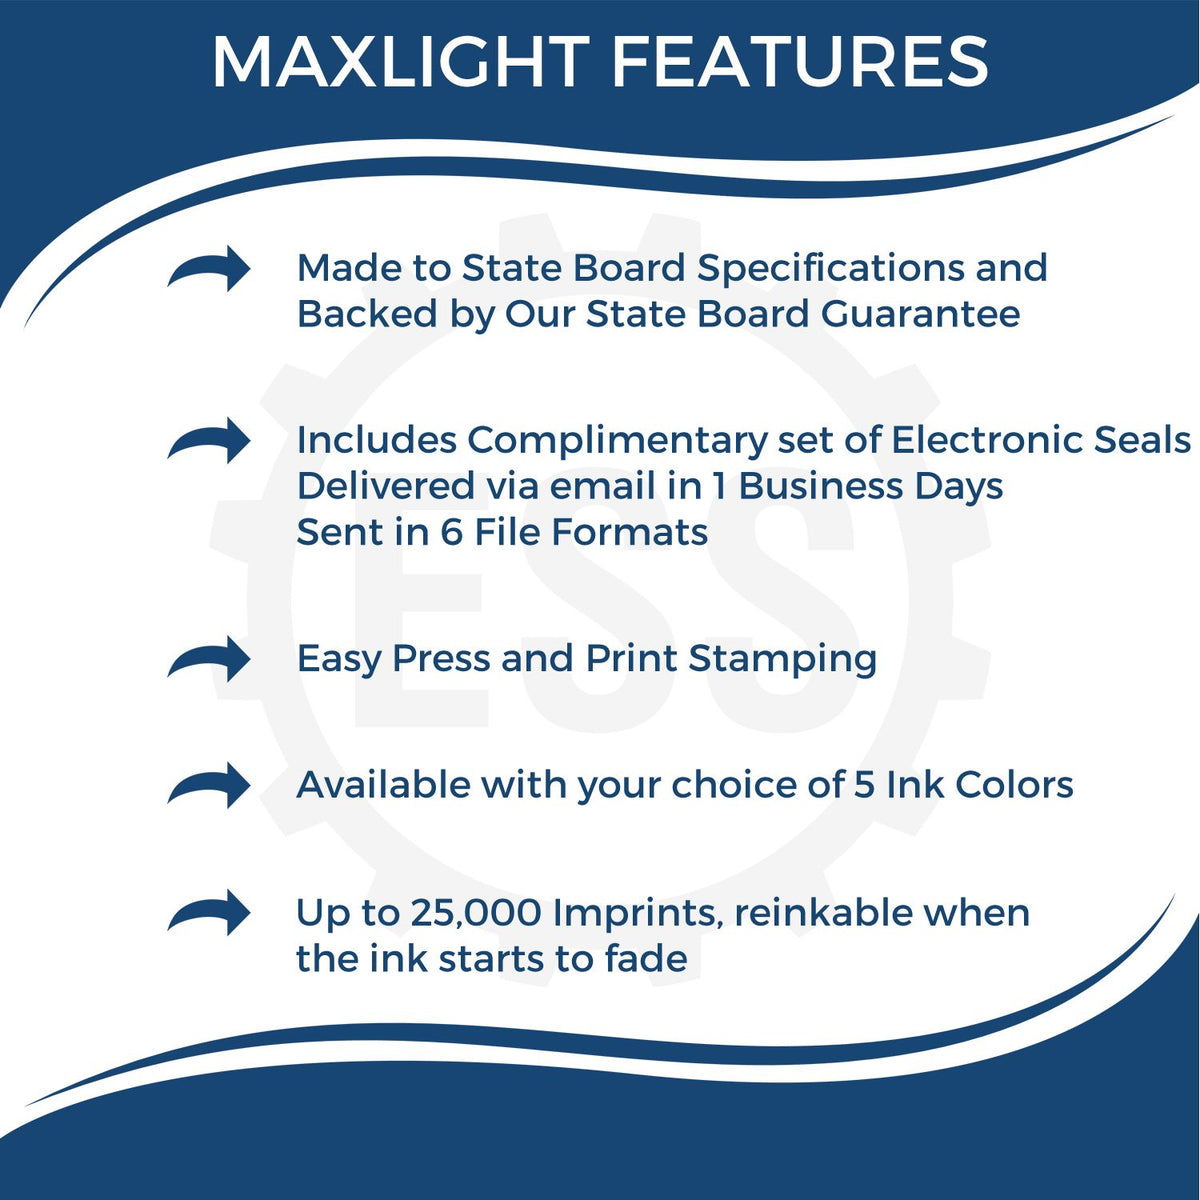 A picture of an infographic highlighting the selling points for the Premium MaxLight Pre-Inked Rhode Island Geology Stamp